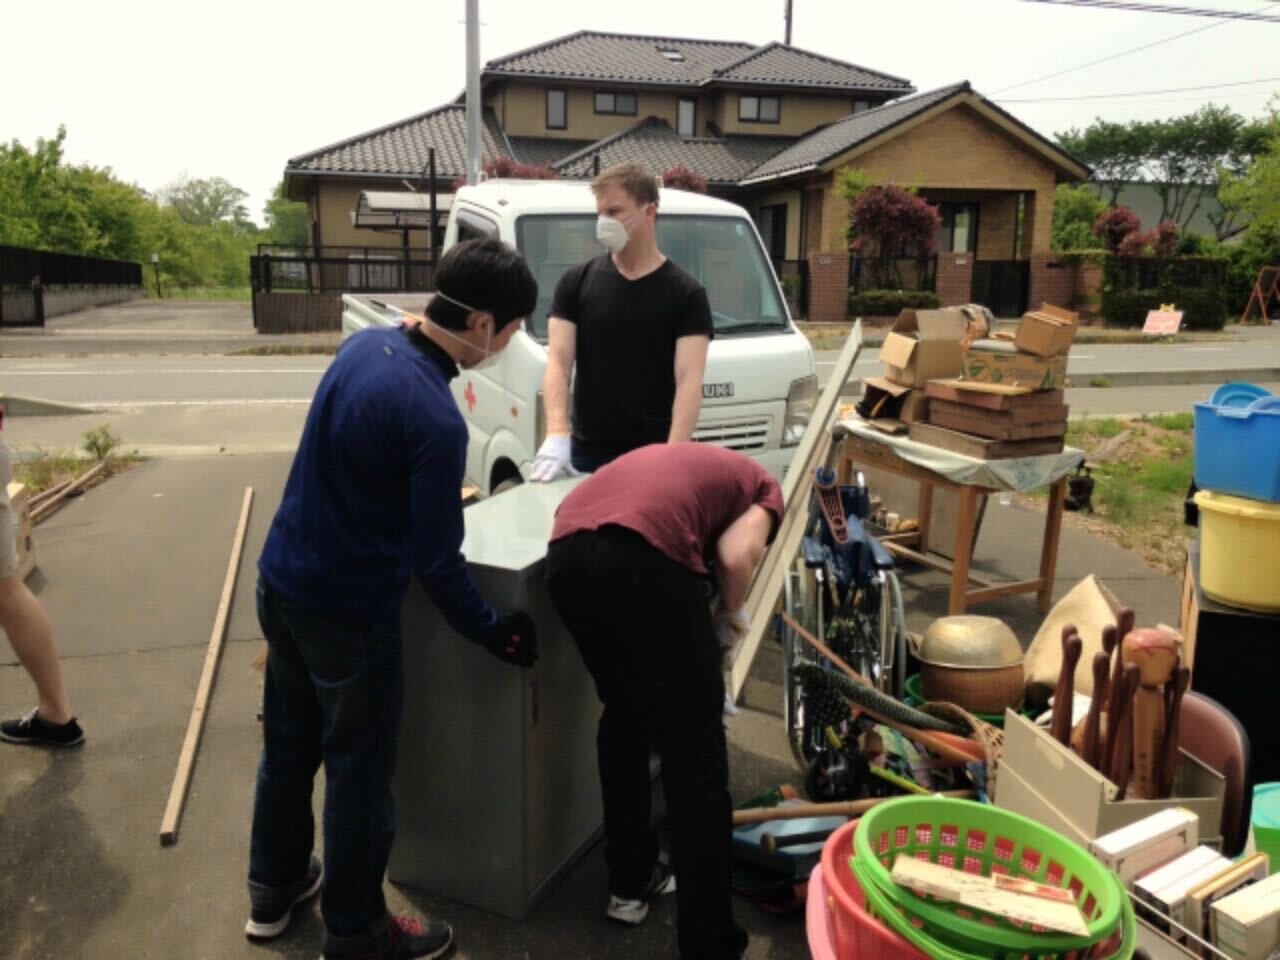 Volunteers from Attuned lending a hand in Tōhoku in 2015